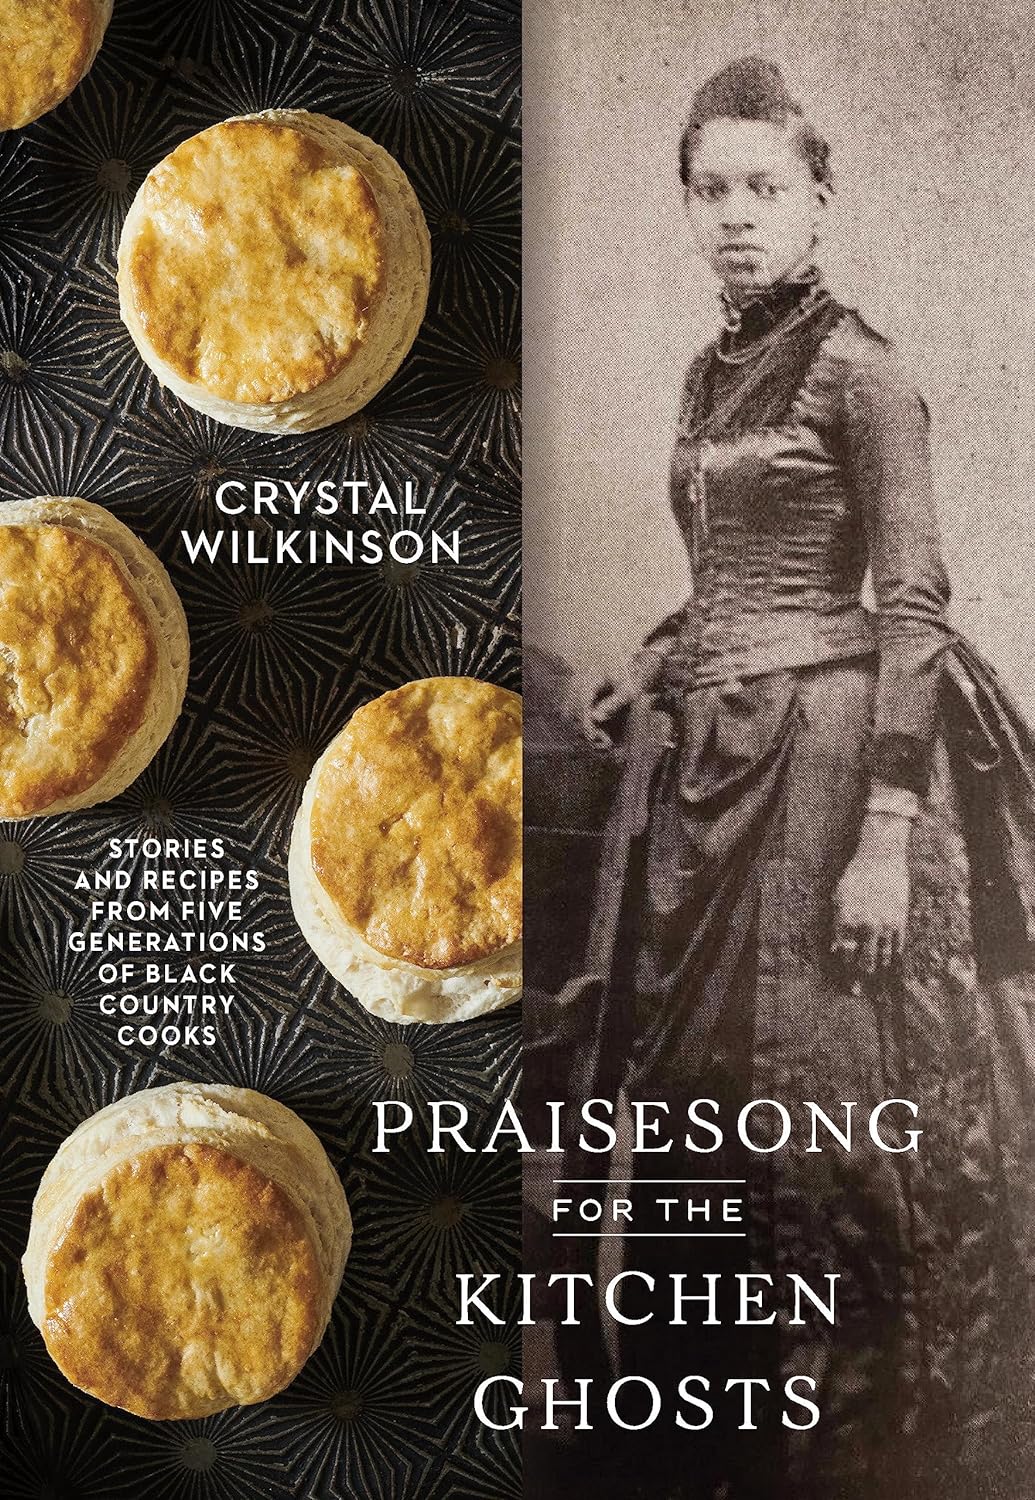 Praisesong for the Kitchen Ghosts: Stories and Recipes from Five Generations of Black Country Cooks (Crystal Wilkinson) *Signed*